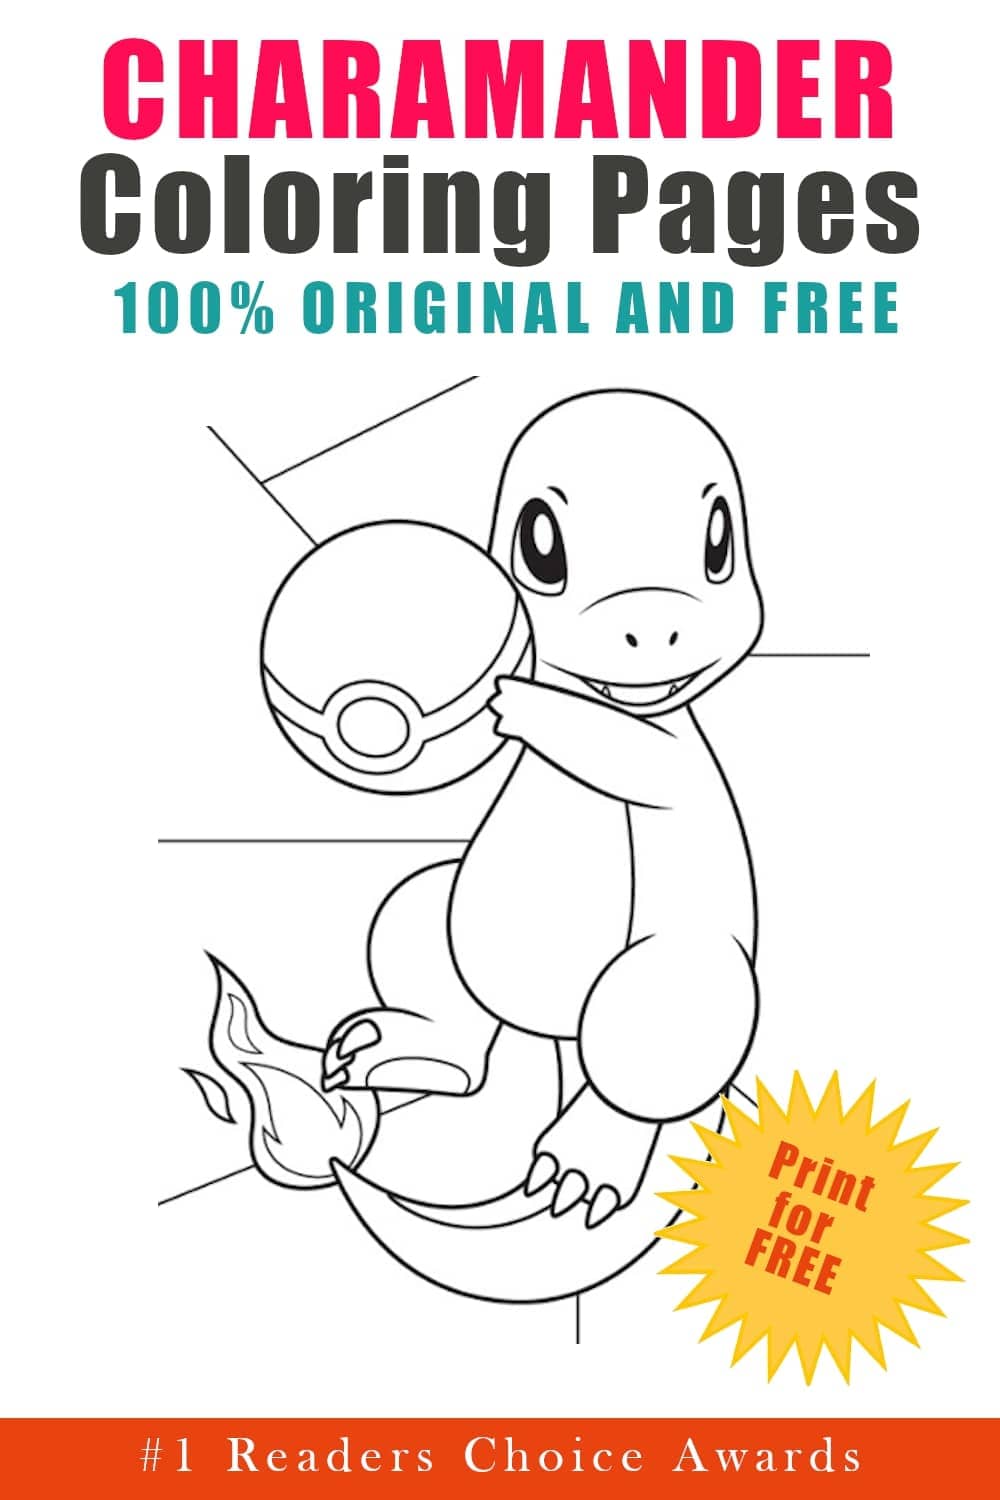 Charmander Cute Image For Kids Coloring Page